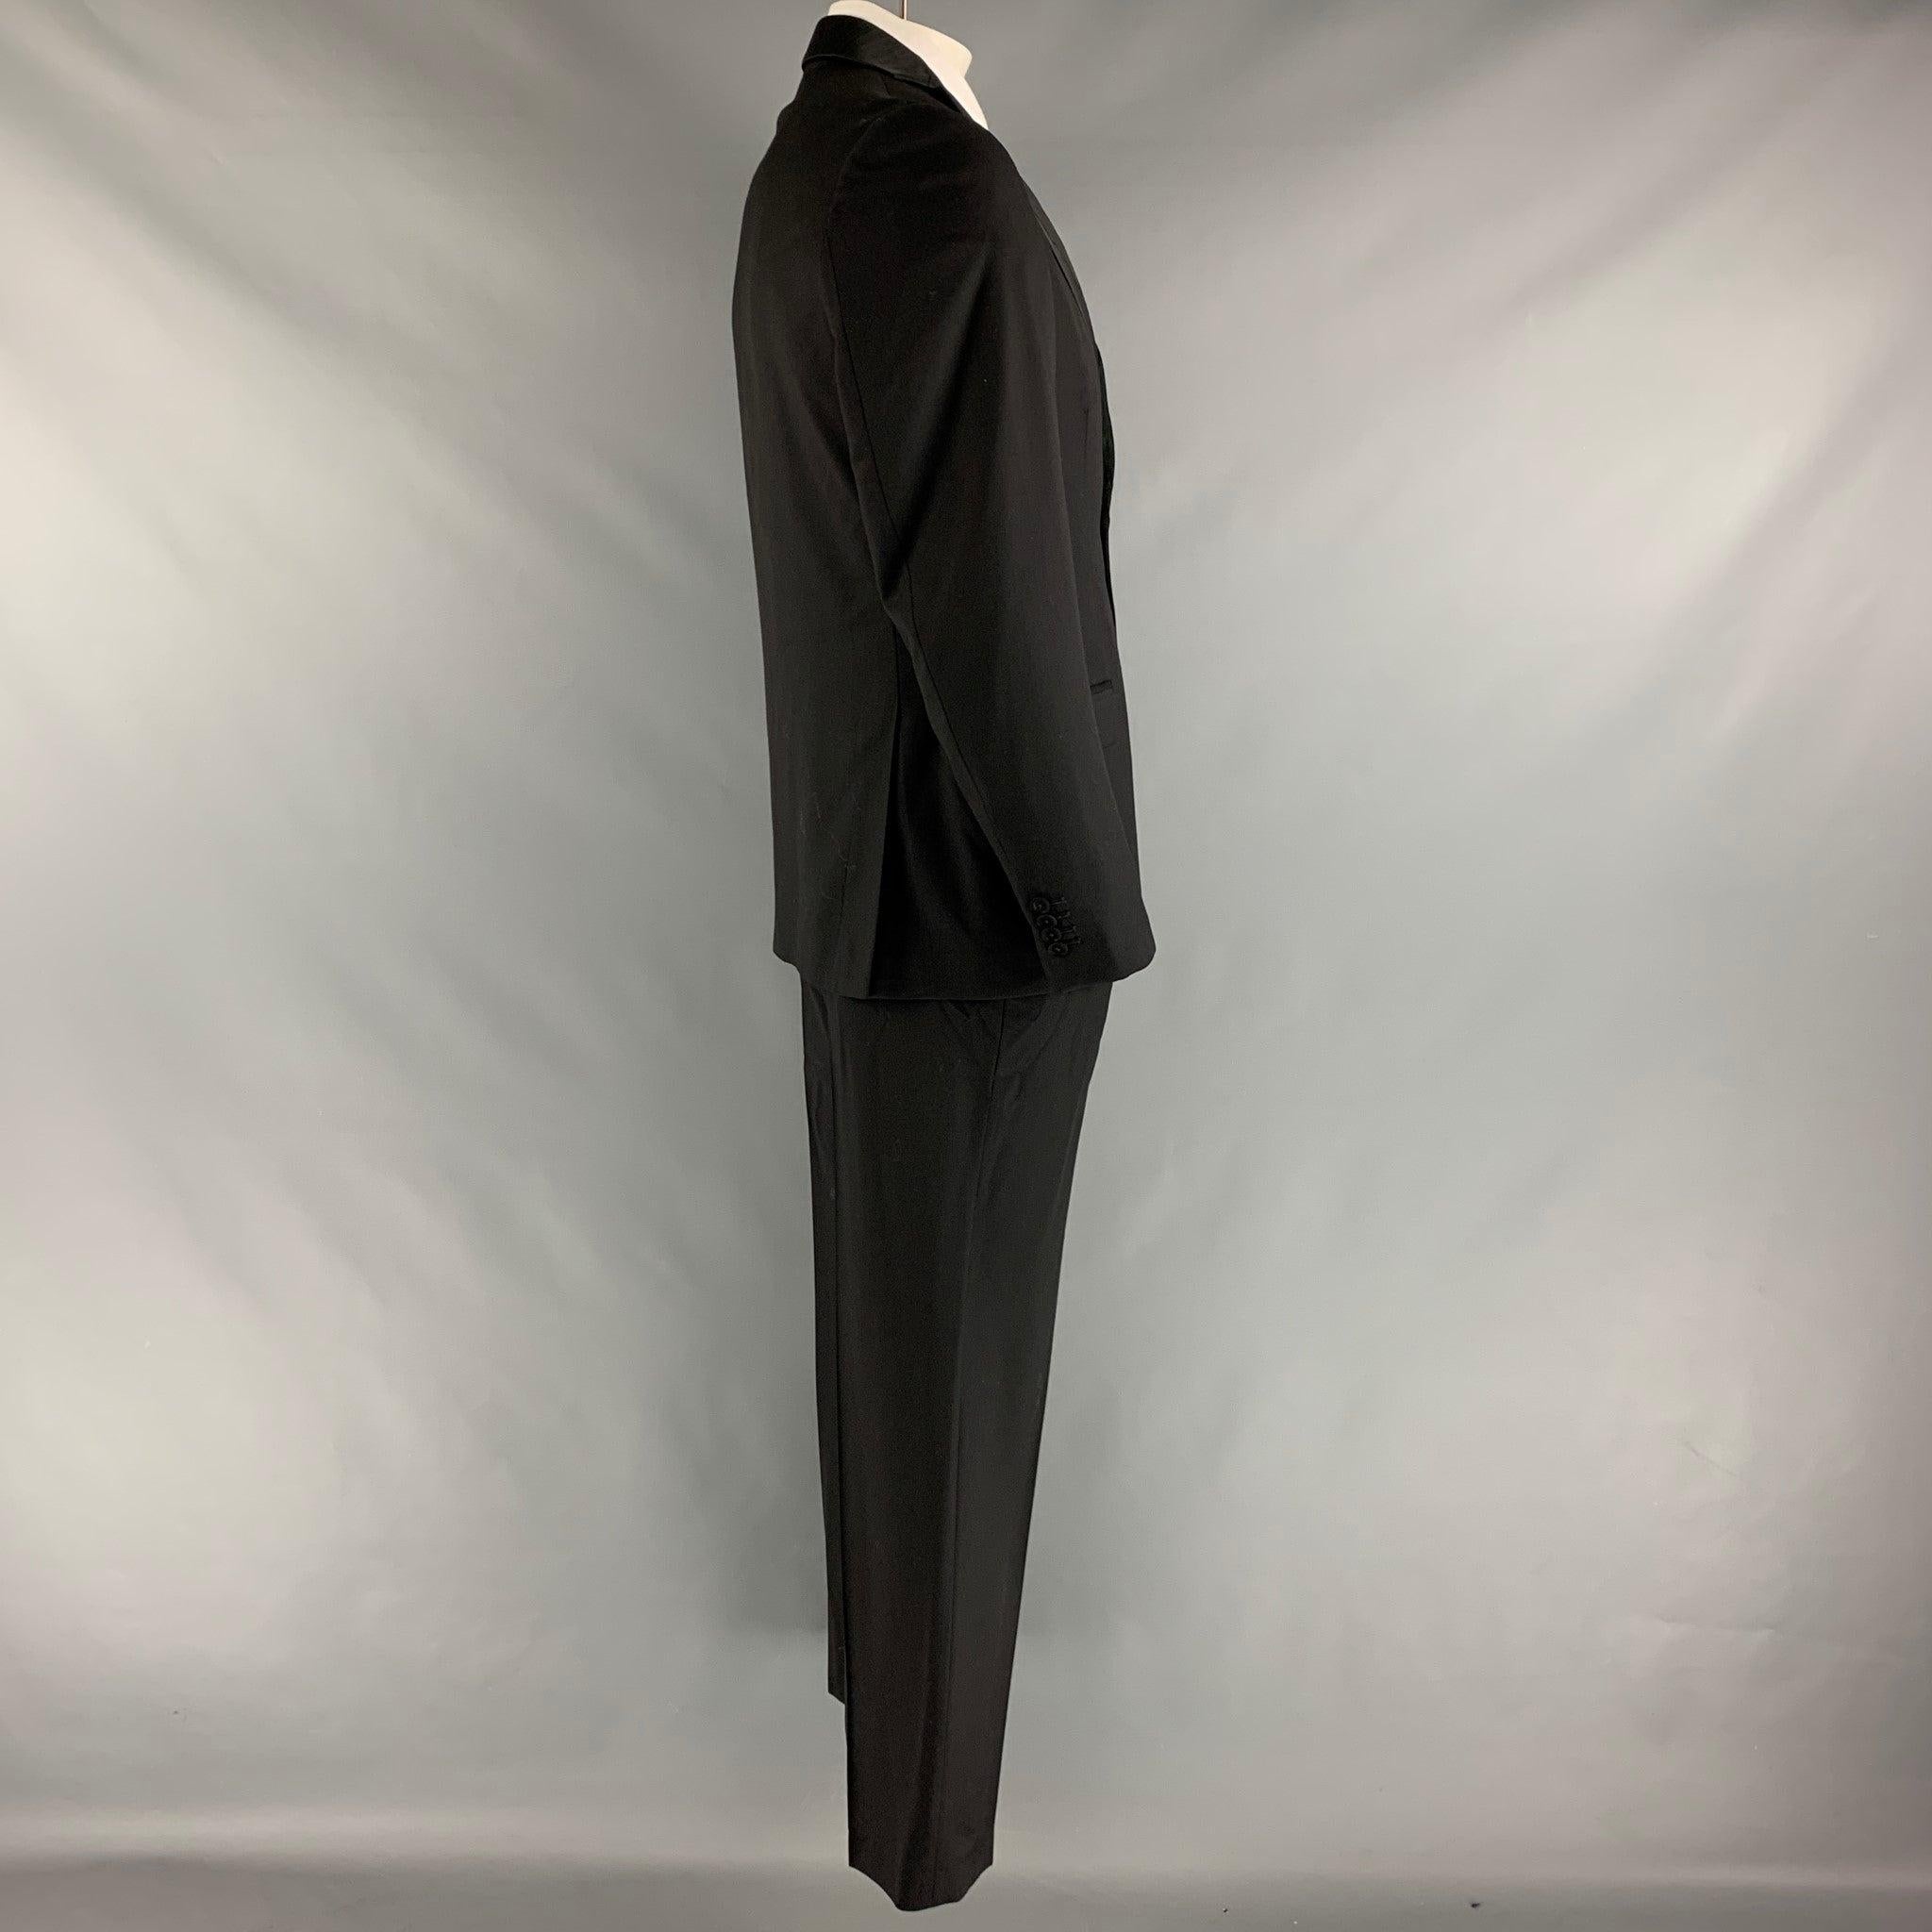 ROMEO GIGLI Size 42 Black Green Solid Wool Notch Lapel Suit In Excellent Condition For Sale In San Francisco, CA